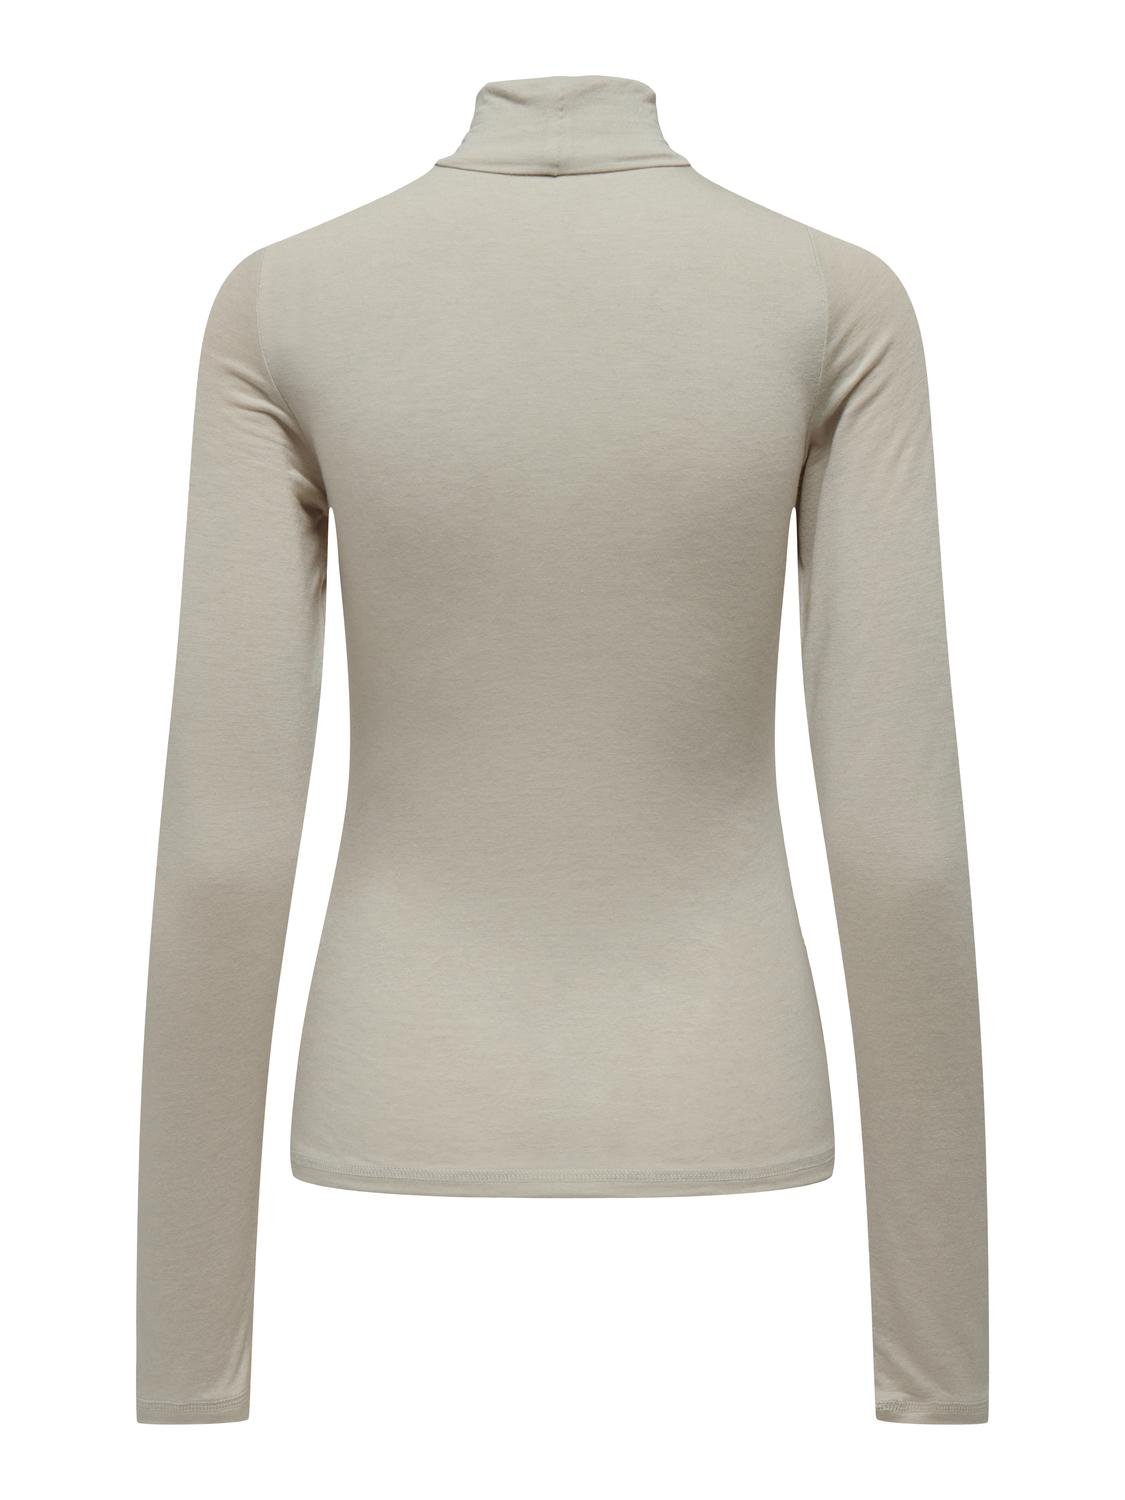 ONLY Regular Fit Roll neck Top -Whitecap Gray - 15311143